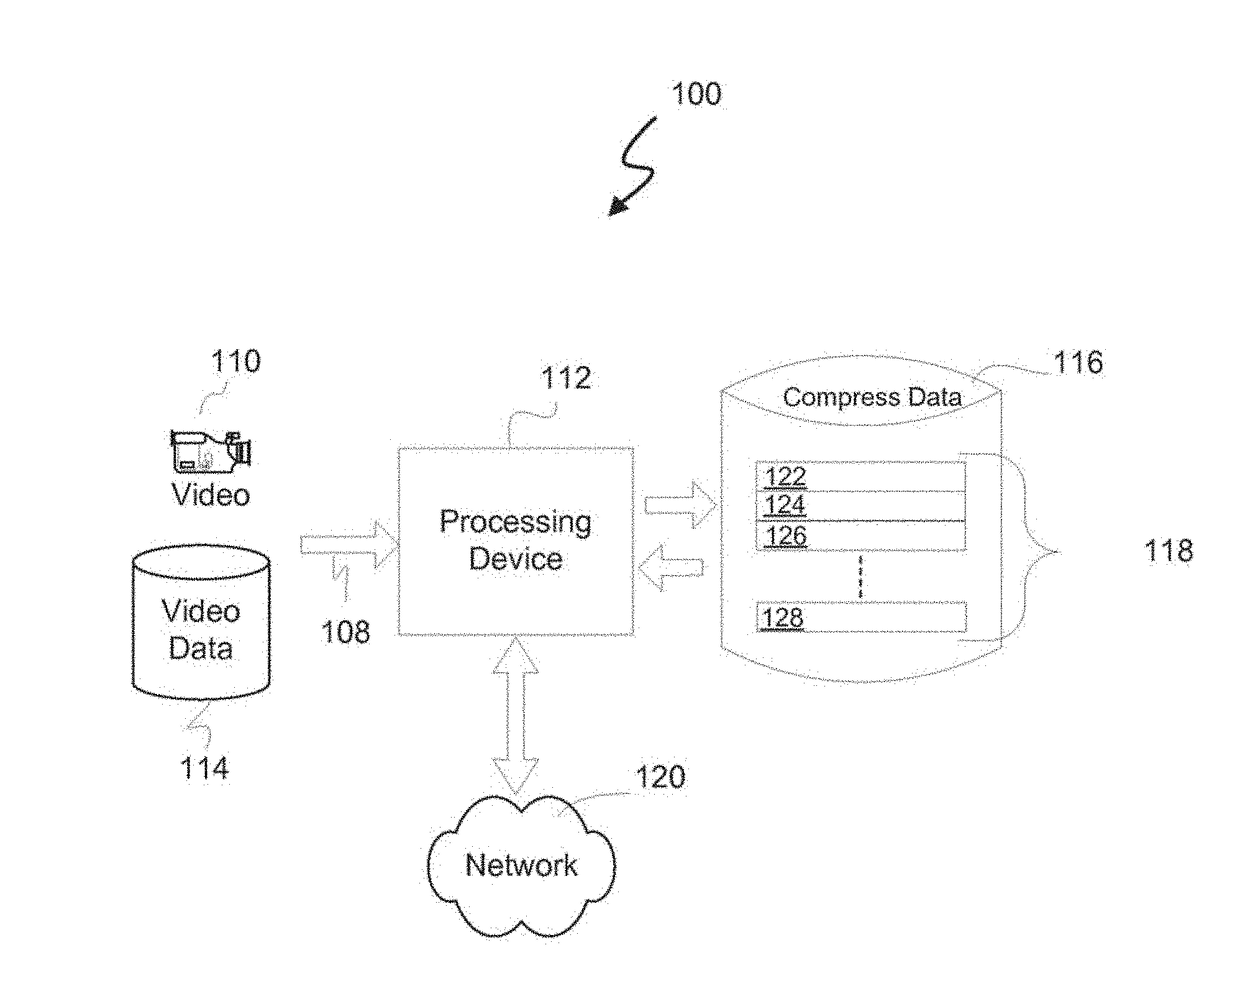 Encoding and decoding selectively retrievable representations of video content